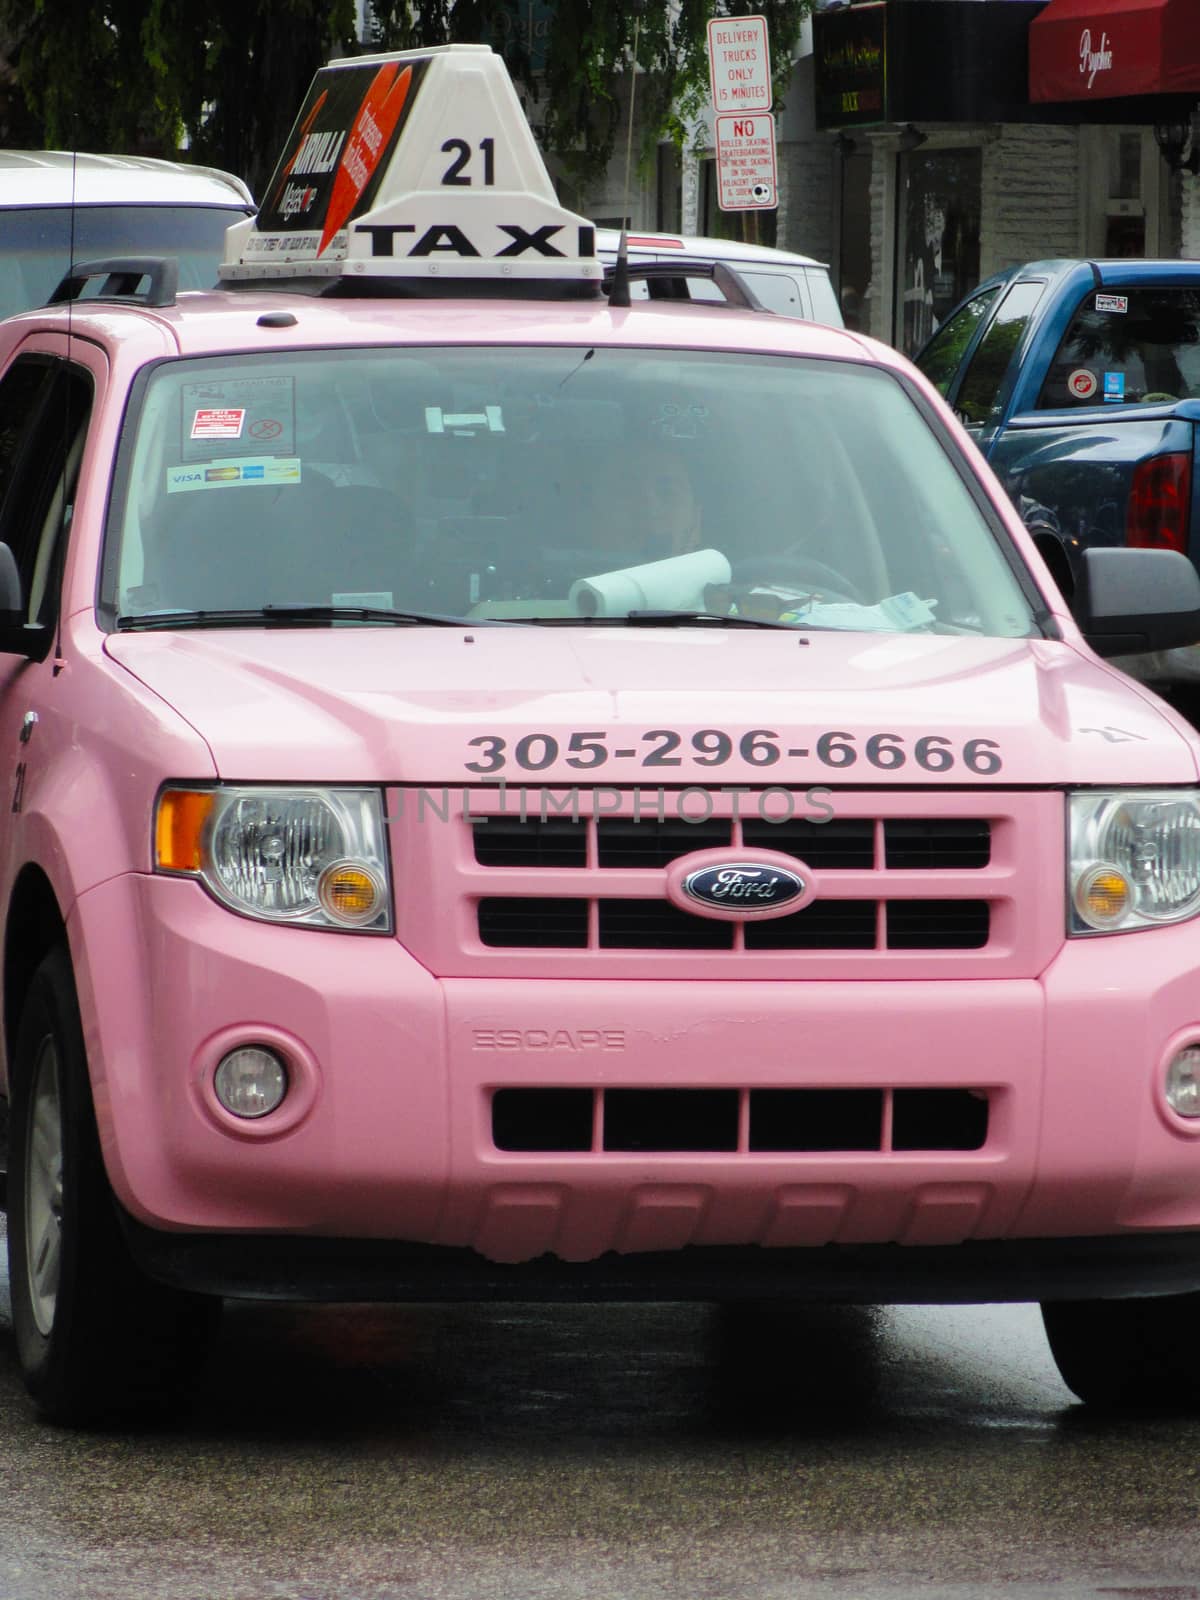 Key West, USA - August 6 2012: Ford Escape SUV Pink Taxi in the streets of downtown Key West in southern Florida
